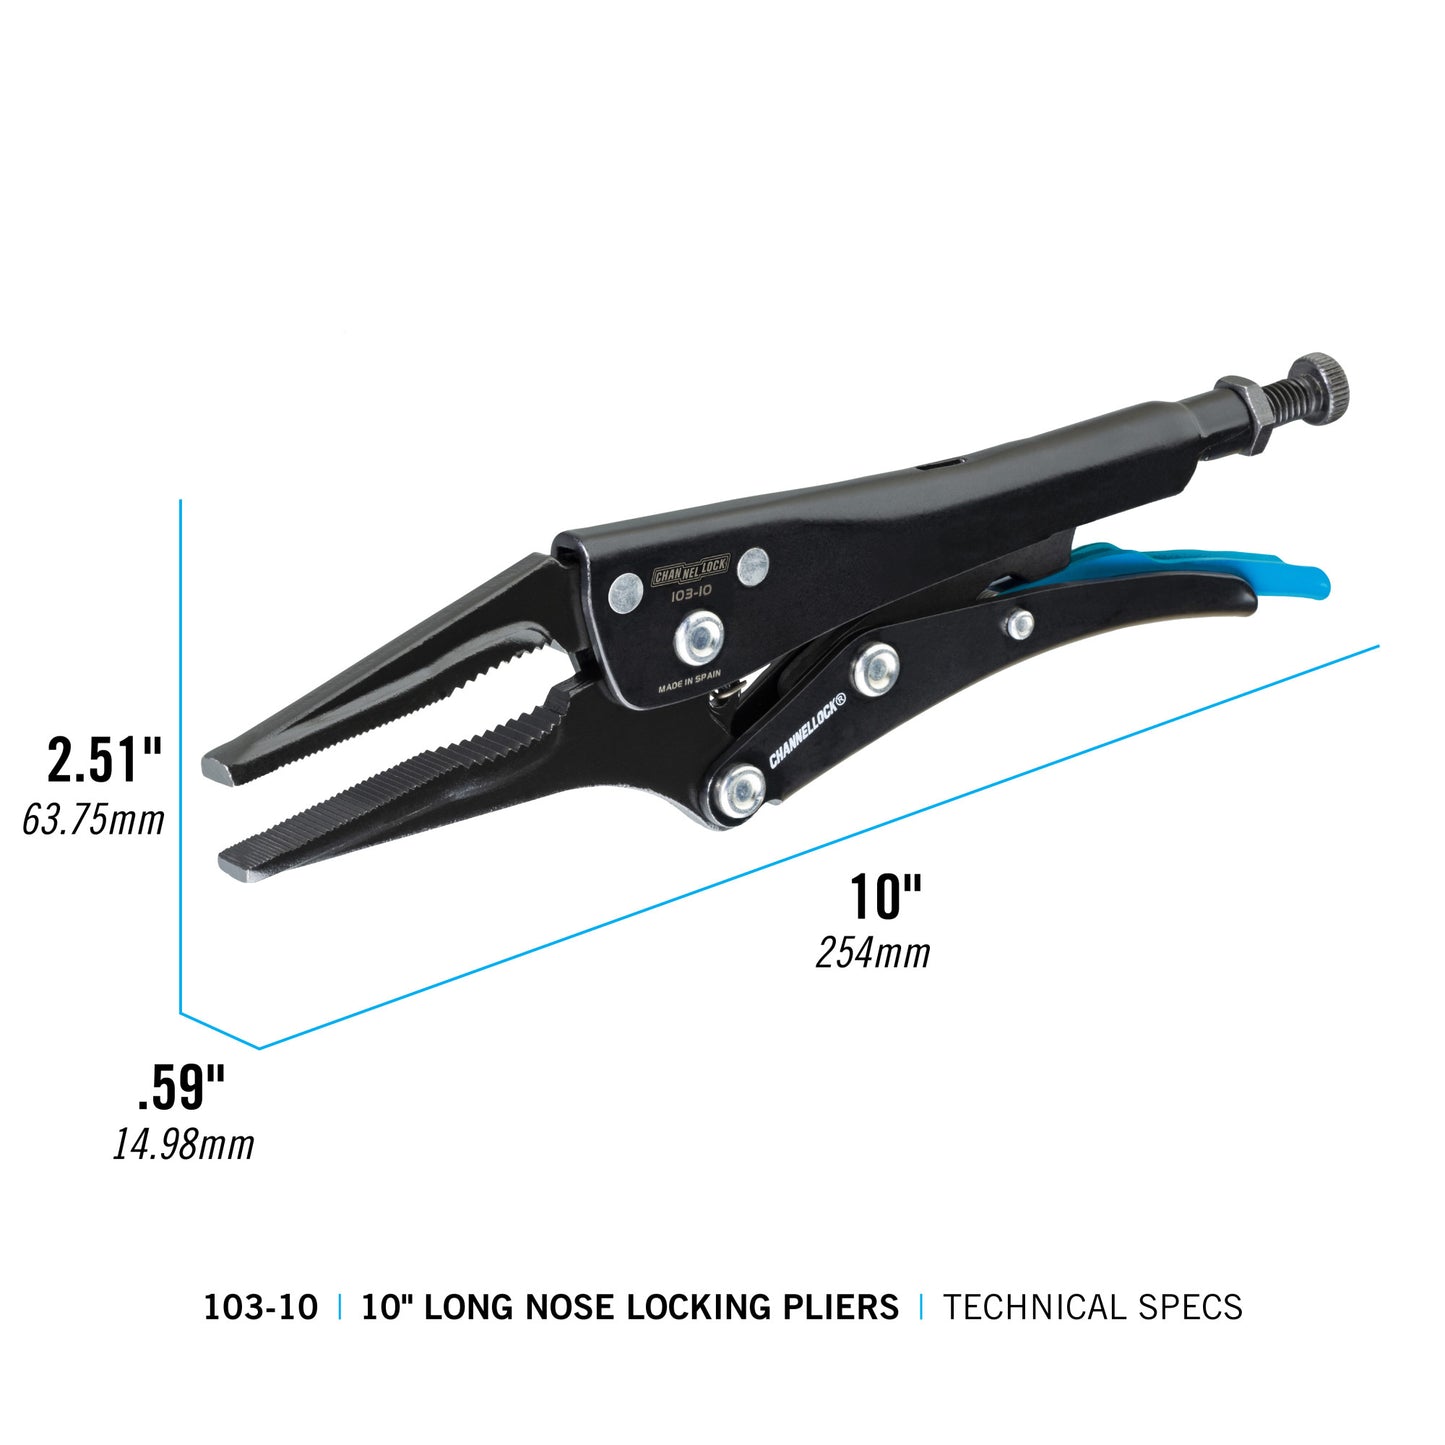 10-inch Combination Long Nose Locking Pliers (103-10)